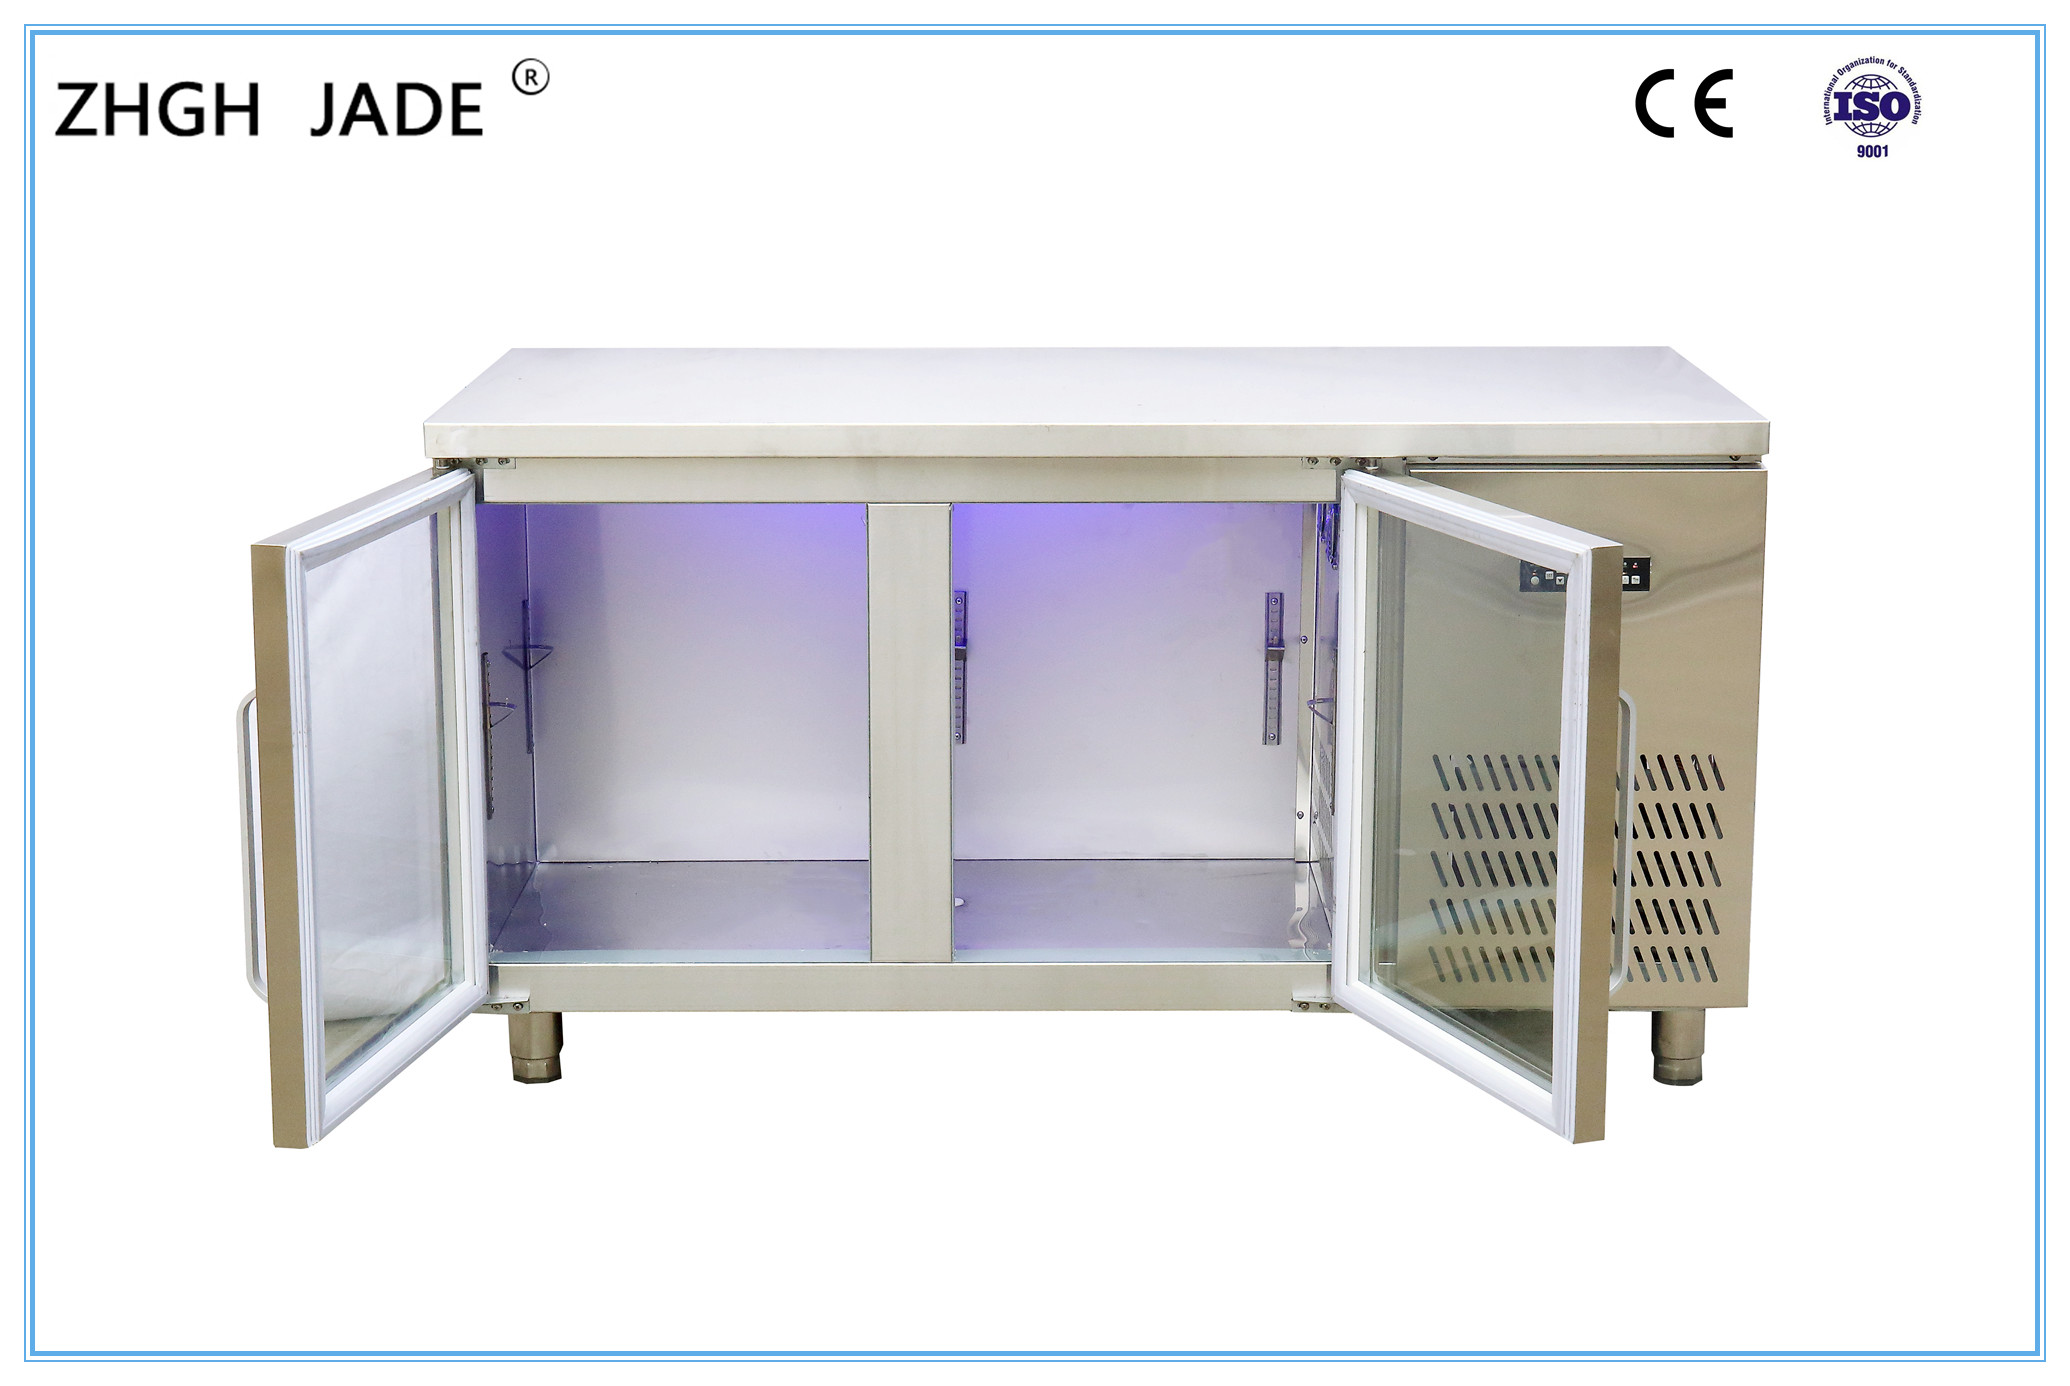 Stainless Steel Blue Light Inside Refrigerator For Food Storage 320W